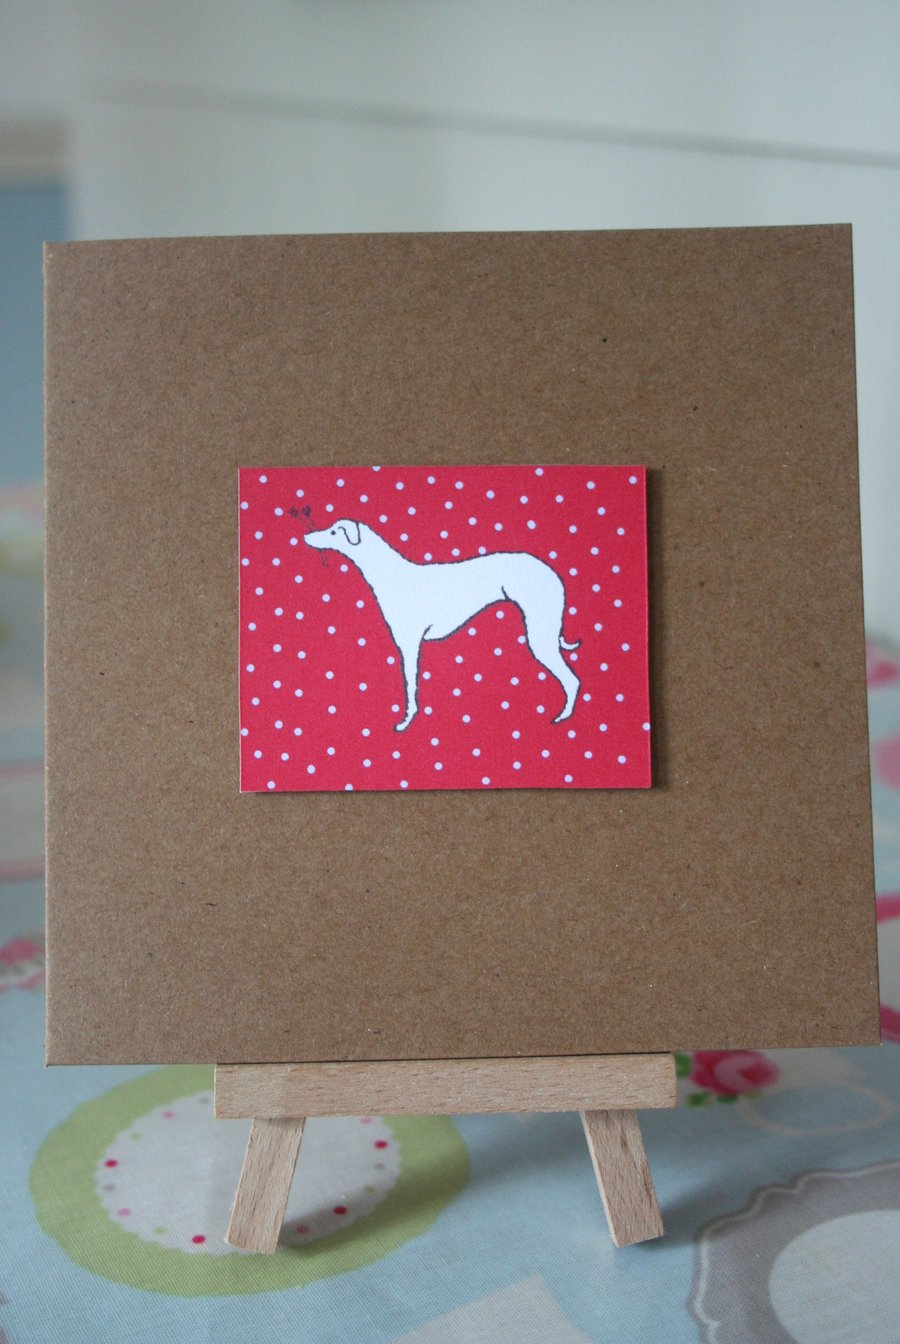 Handmade Christmas Red Whippet Dog Greetings Card - FREE P&P IN UK